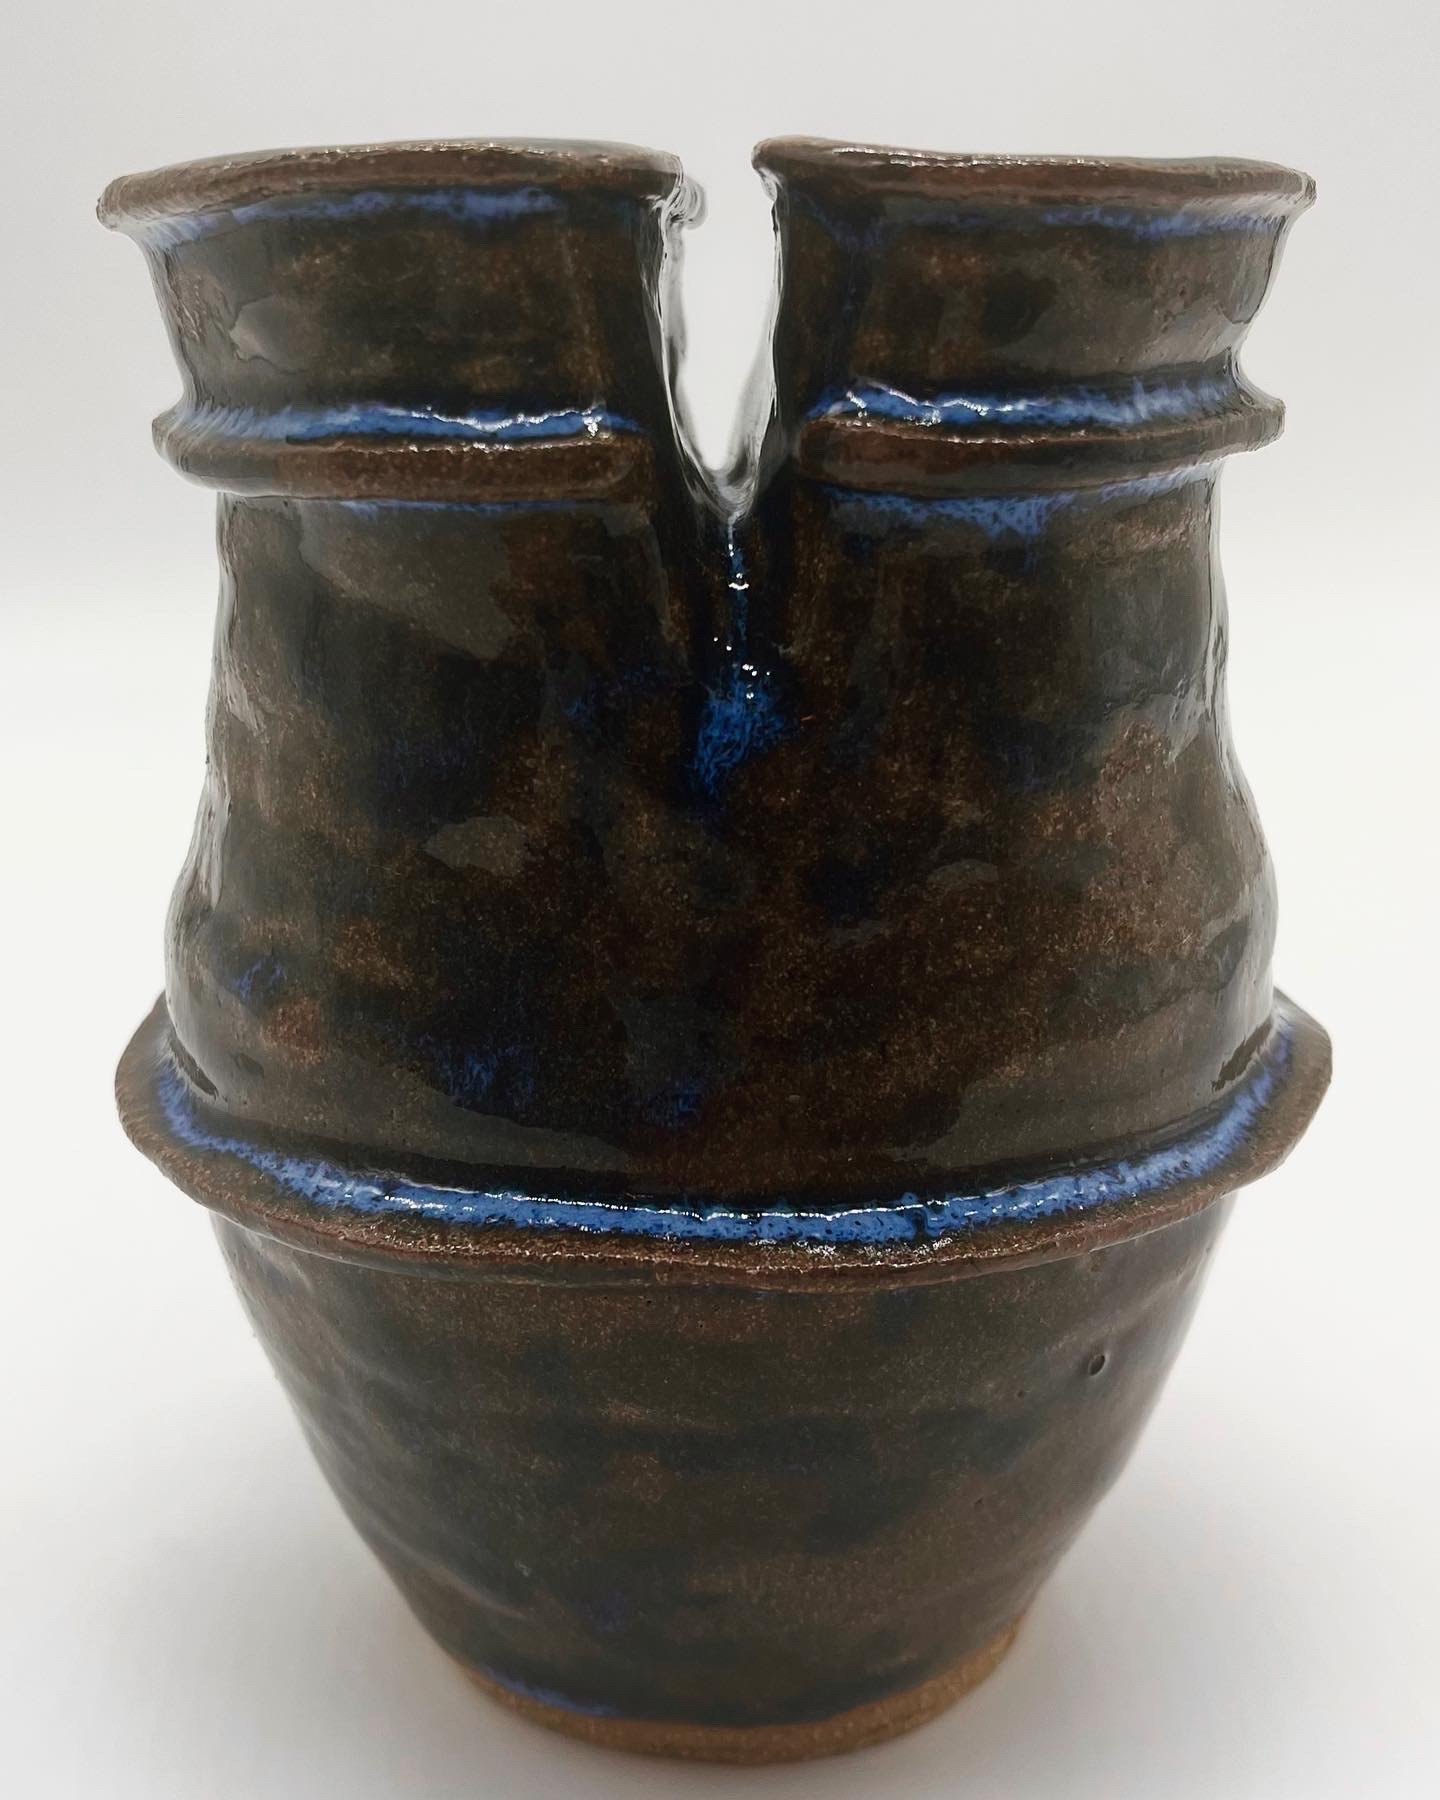 Amador clay with "fishguts" glaze 6x4.5x4.5" | $220  Click for full view